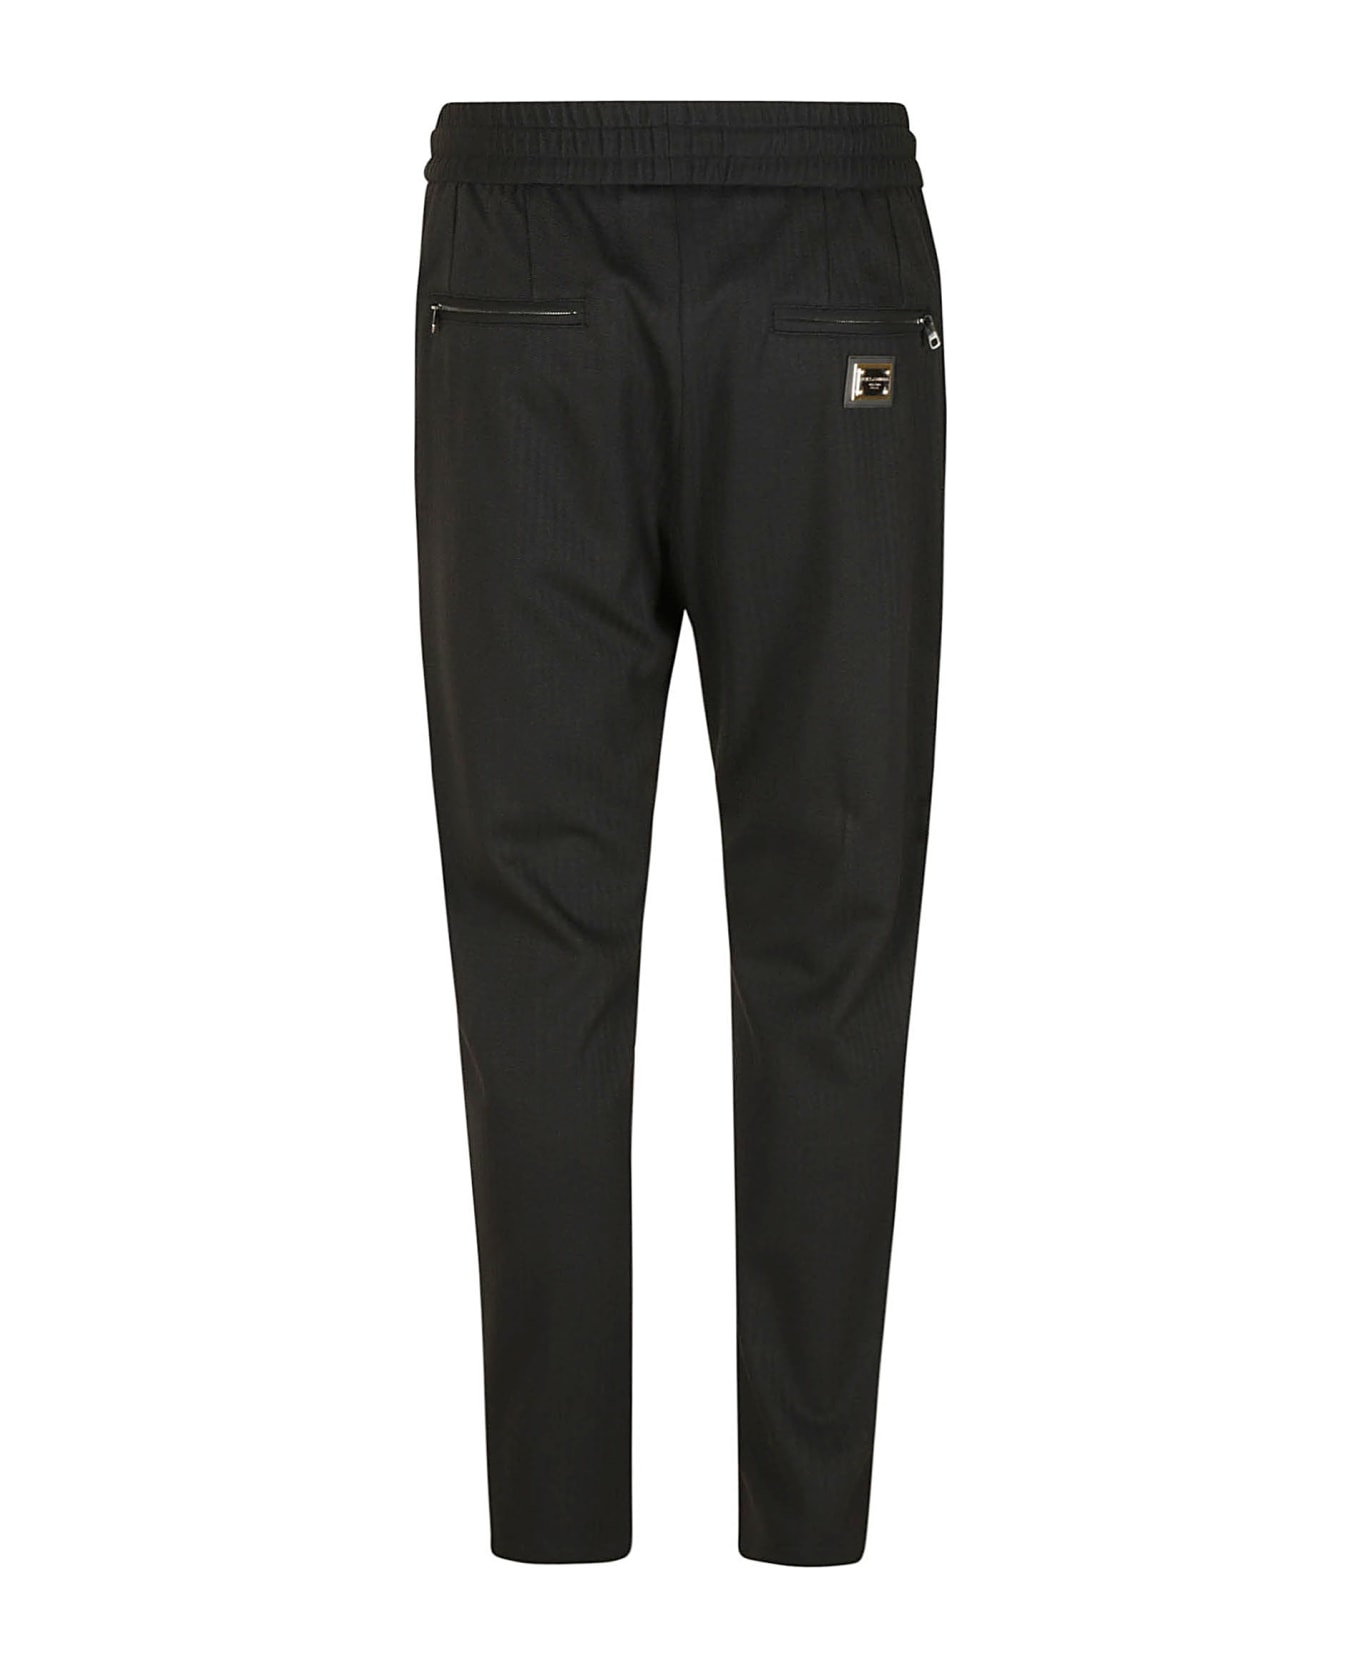 Dolce & Gabbana Drawstring Waist Cropped Front Trousers - Black